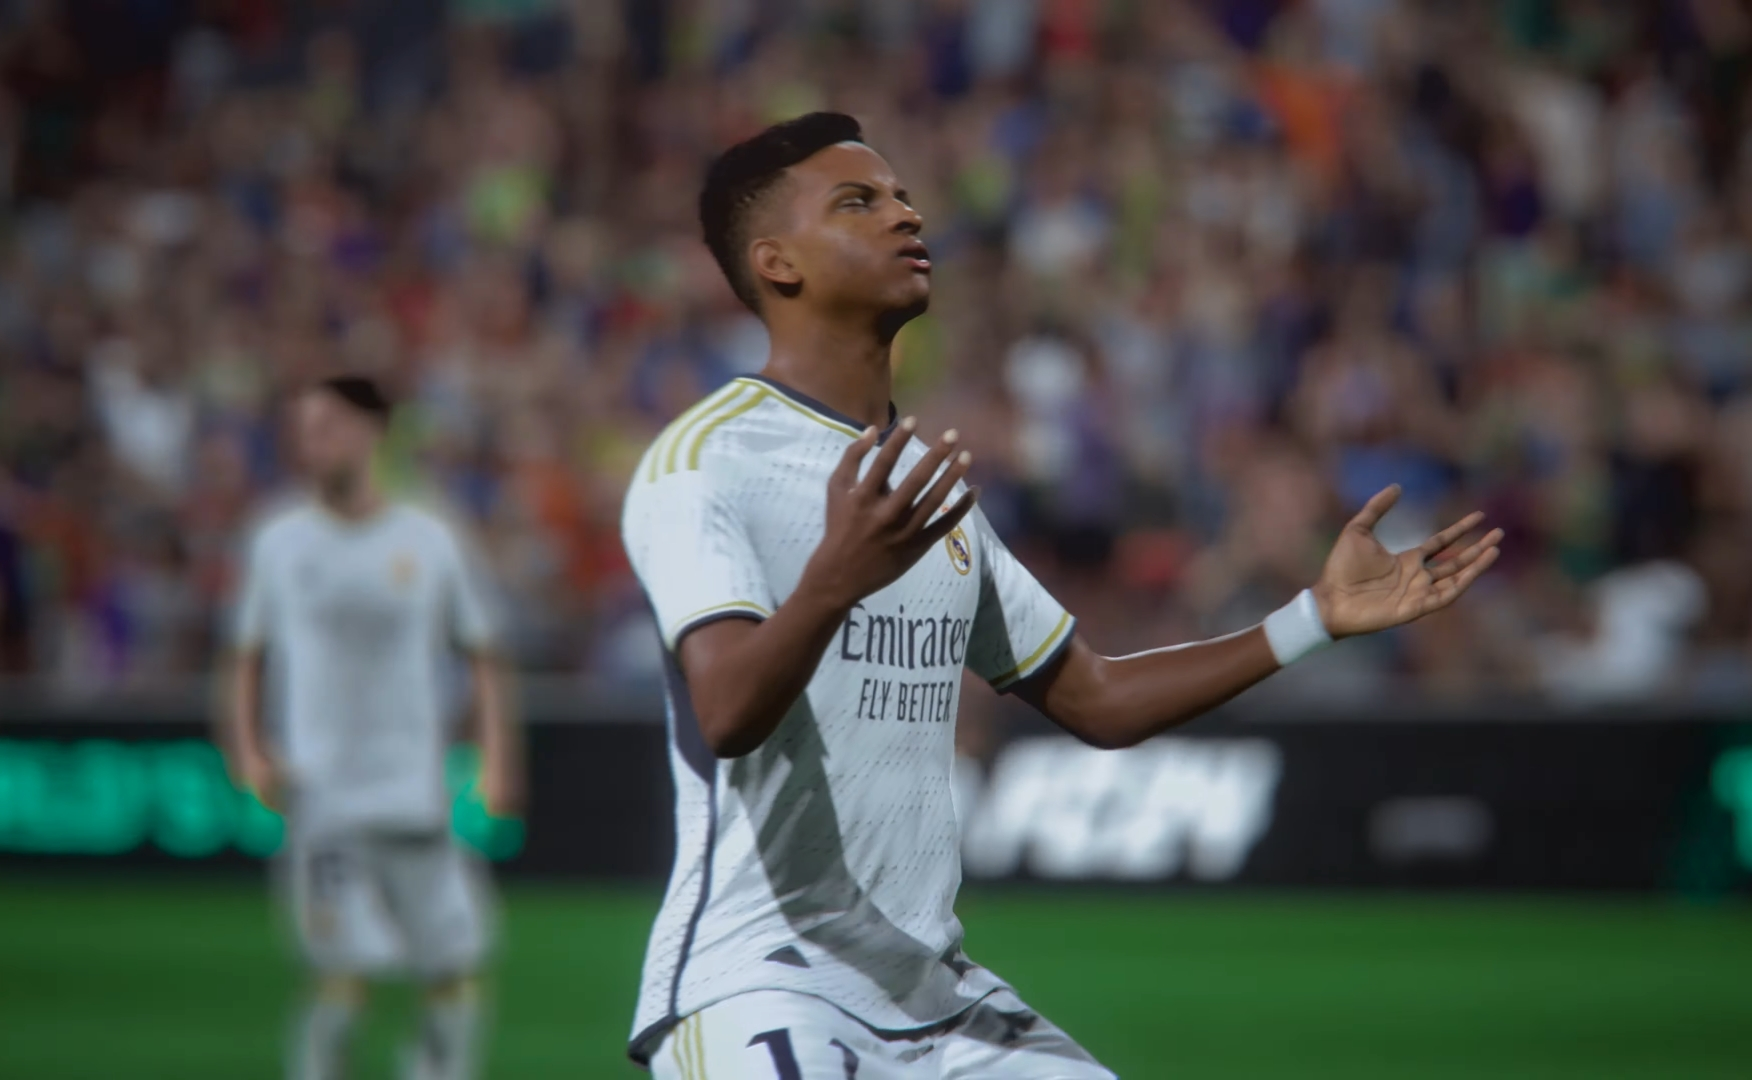 Will EA Sports FC 24 release on the PS4?